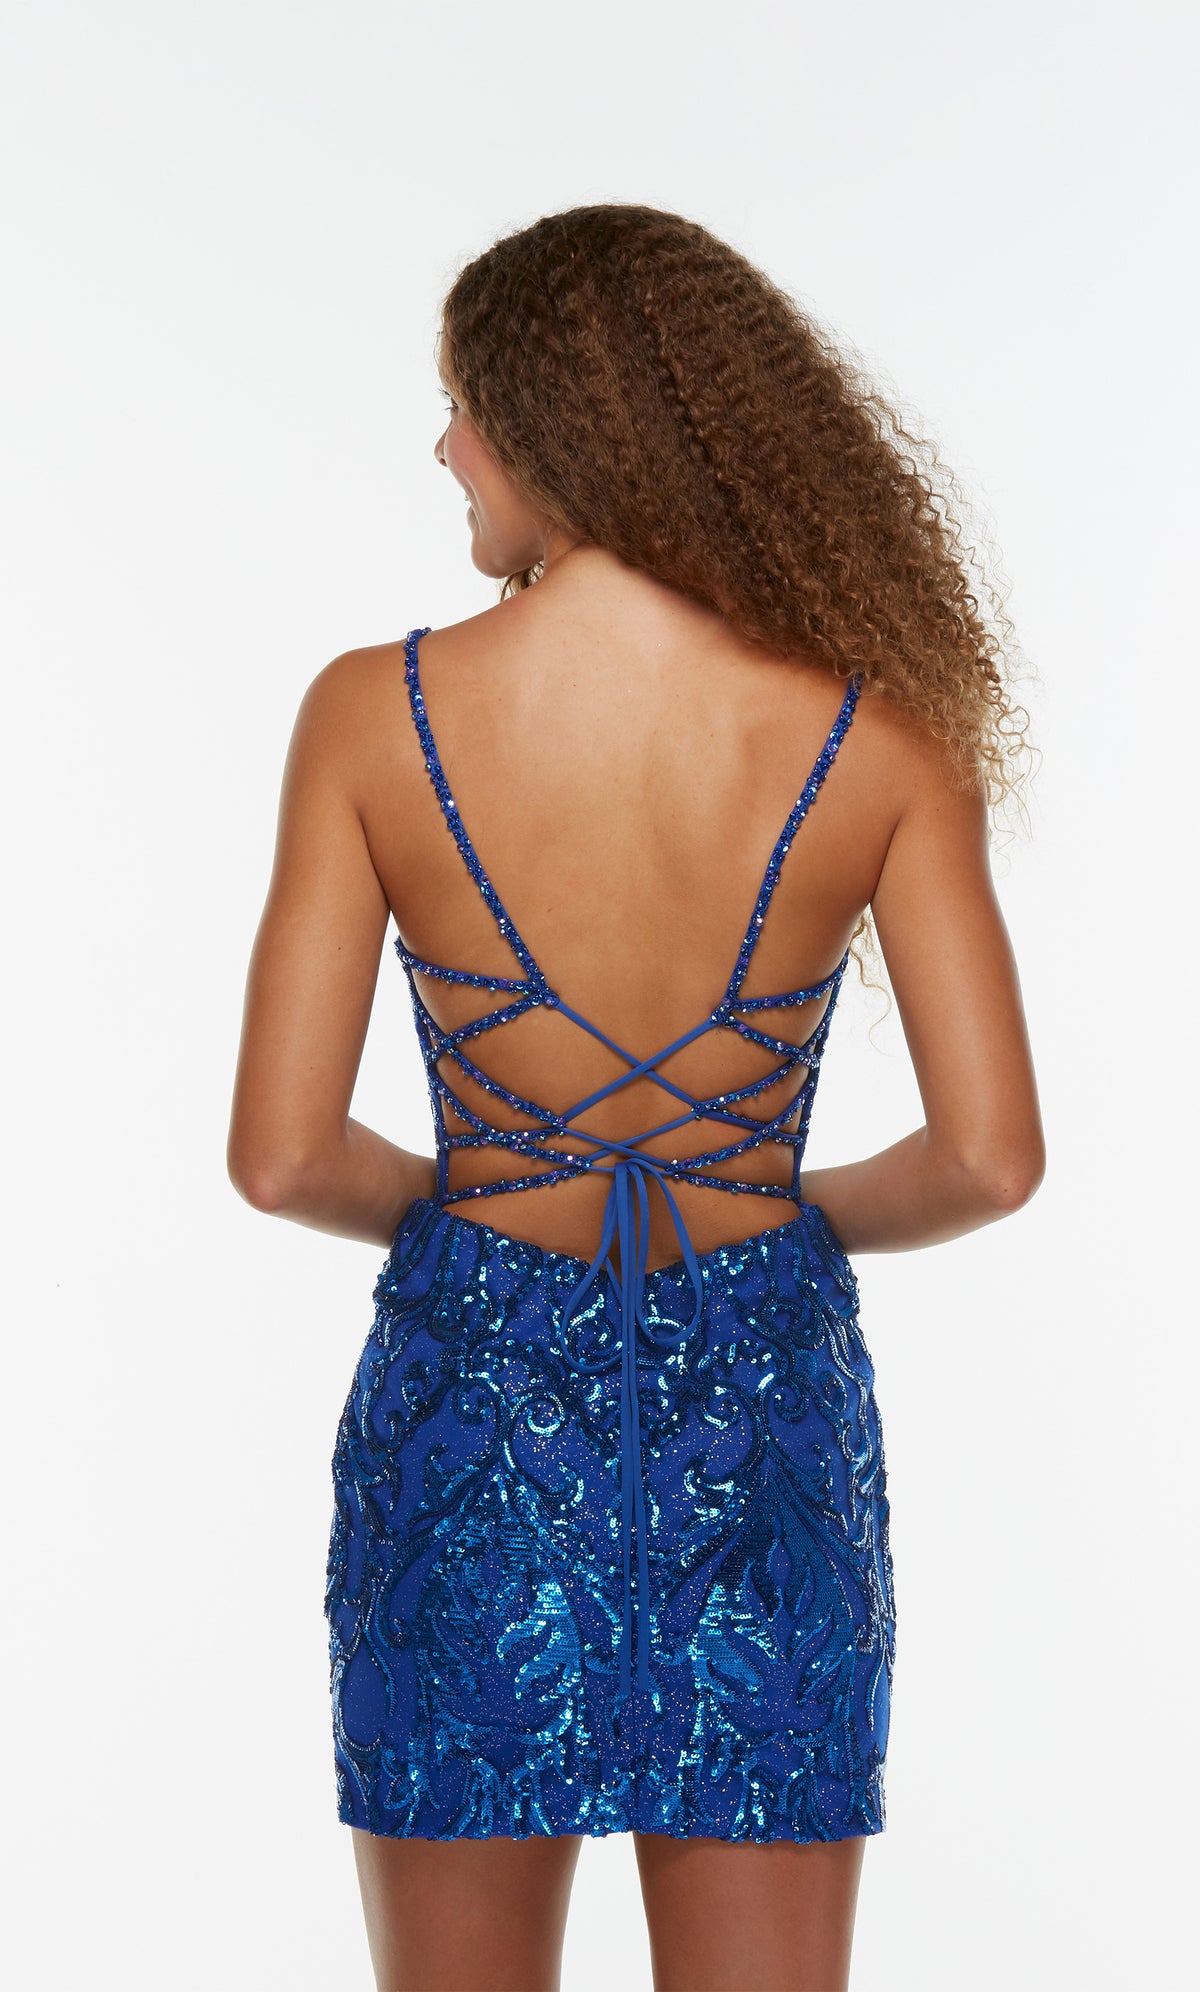 Blue sequin embellished homecoming dress with a strappy back.